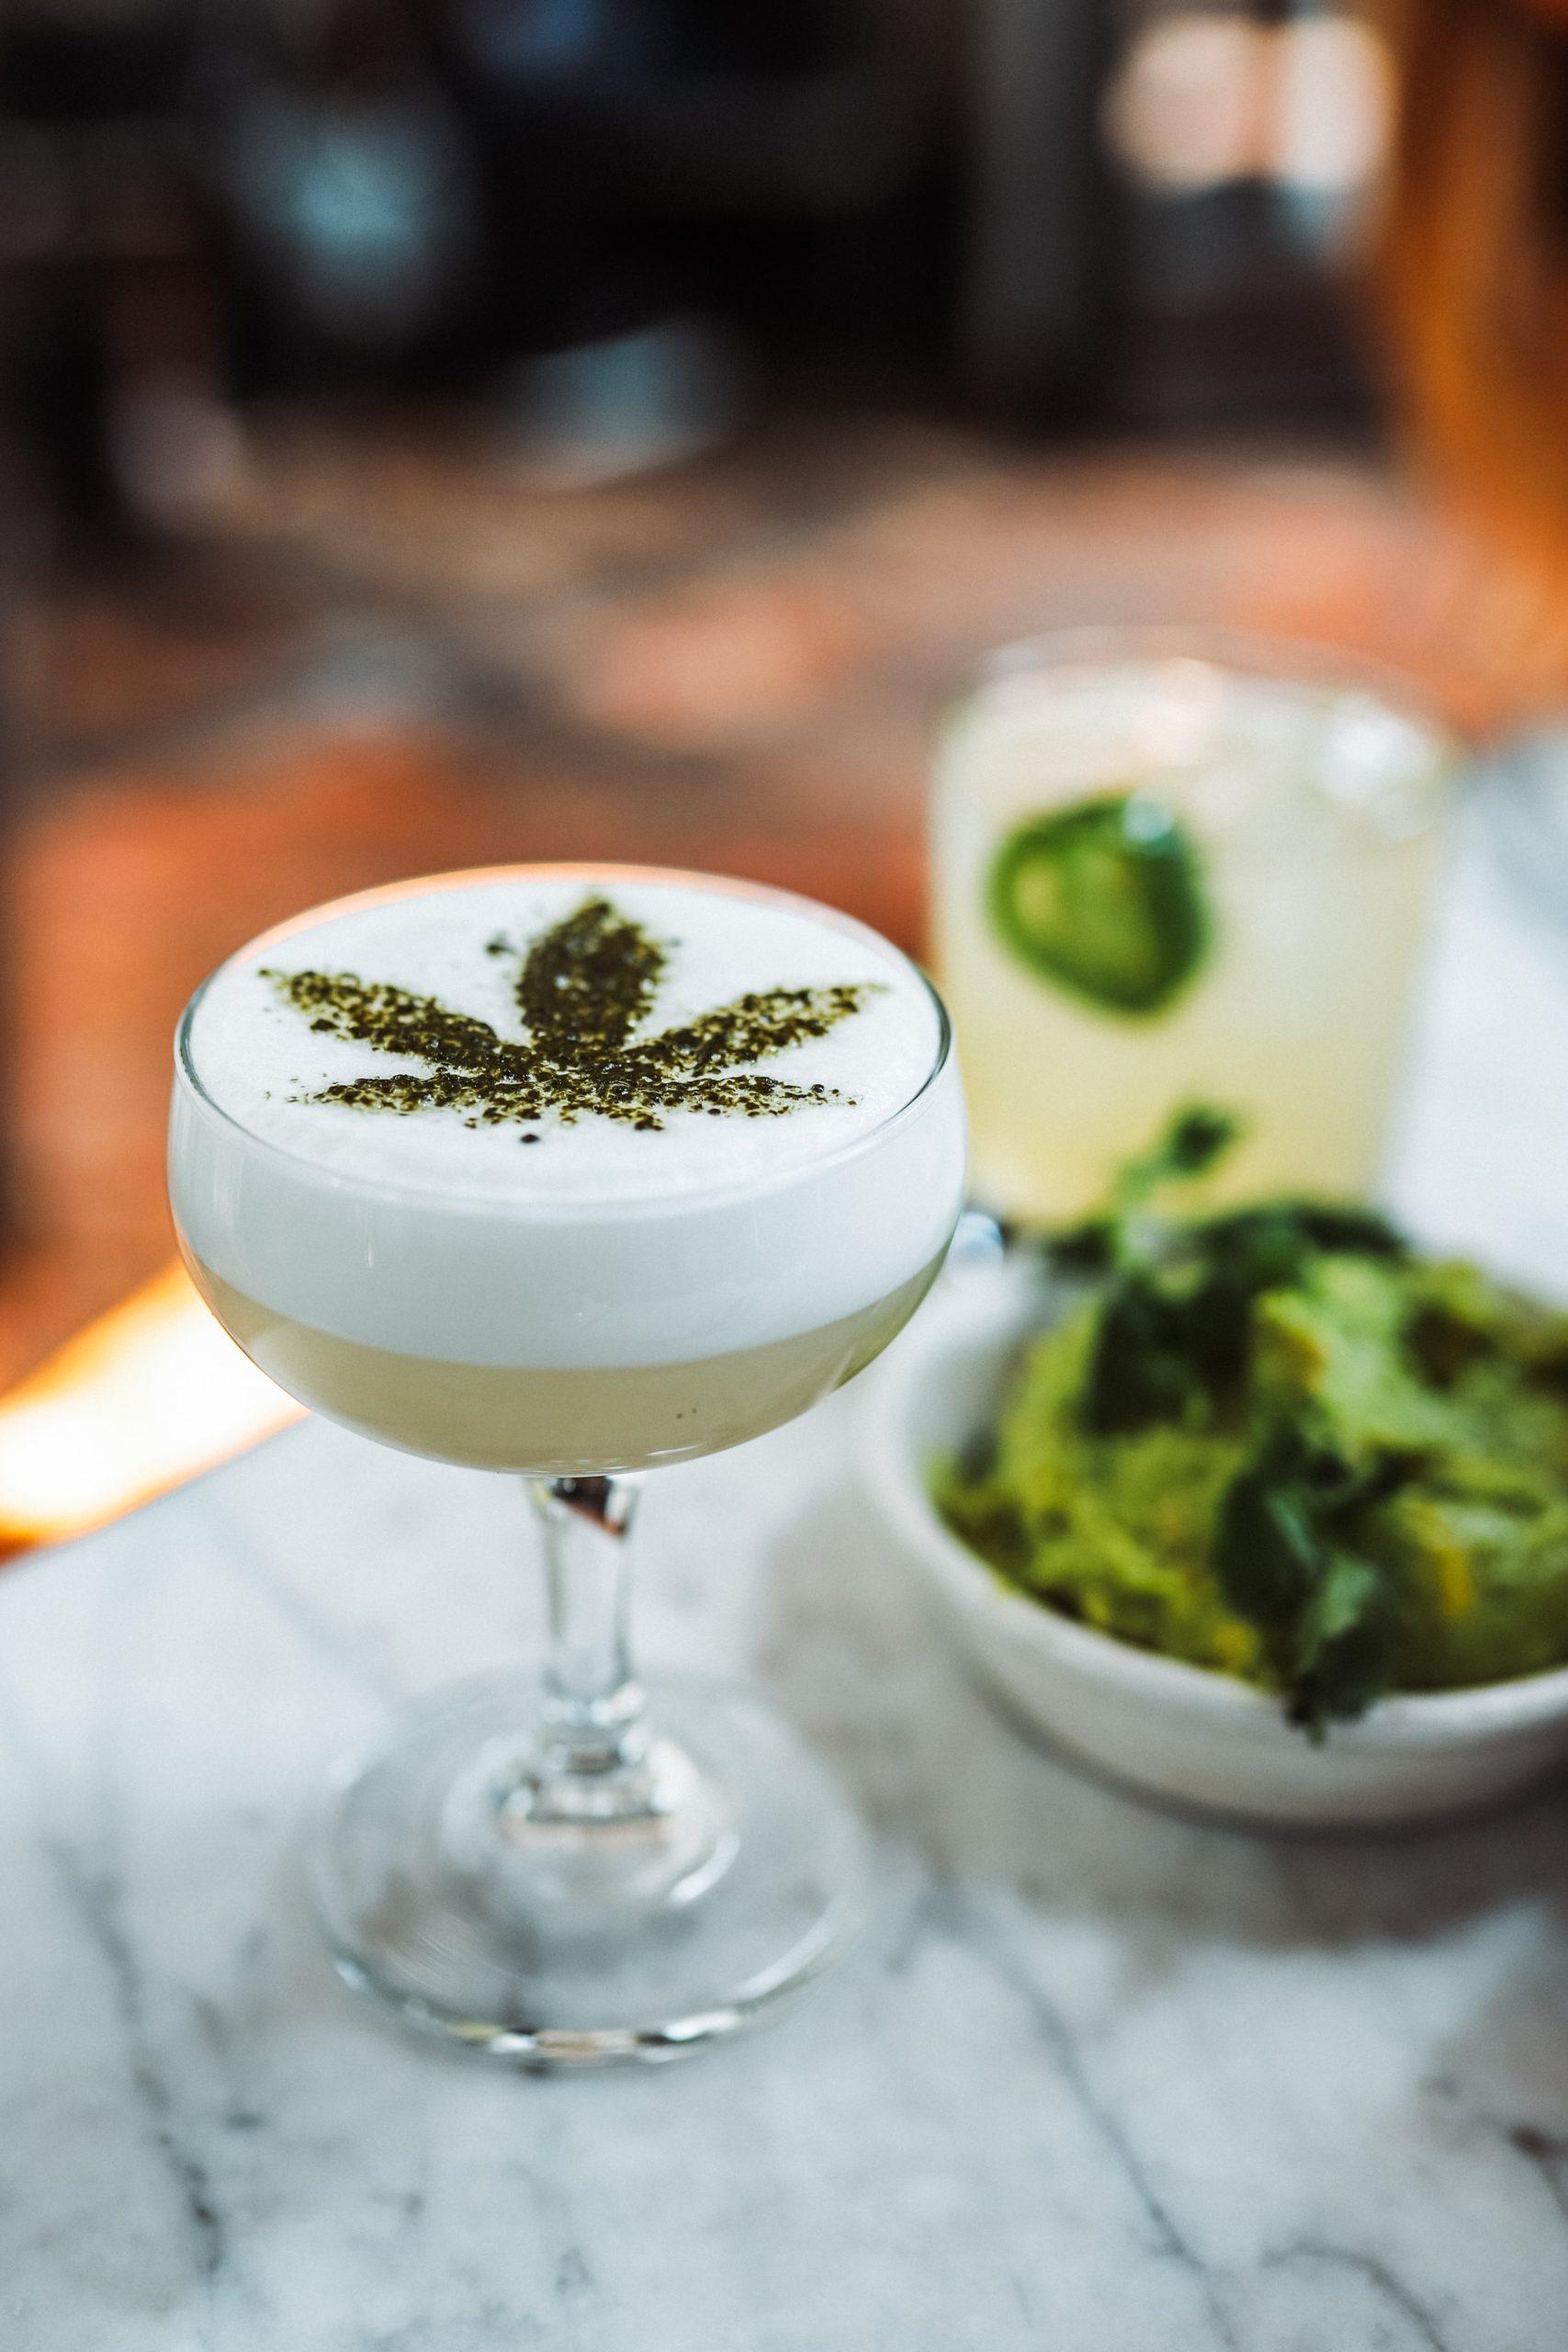 The Science Behind Making Cannabis Drinkable